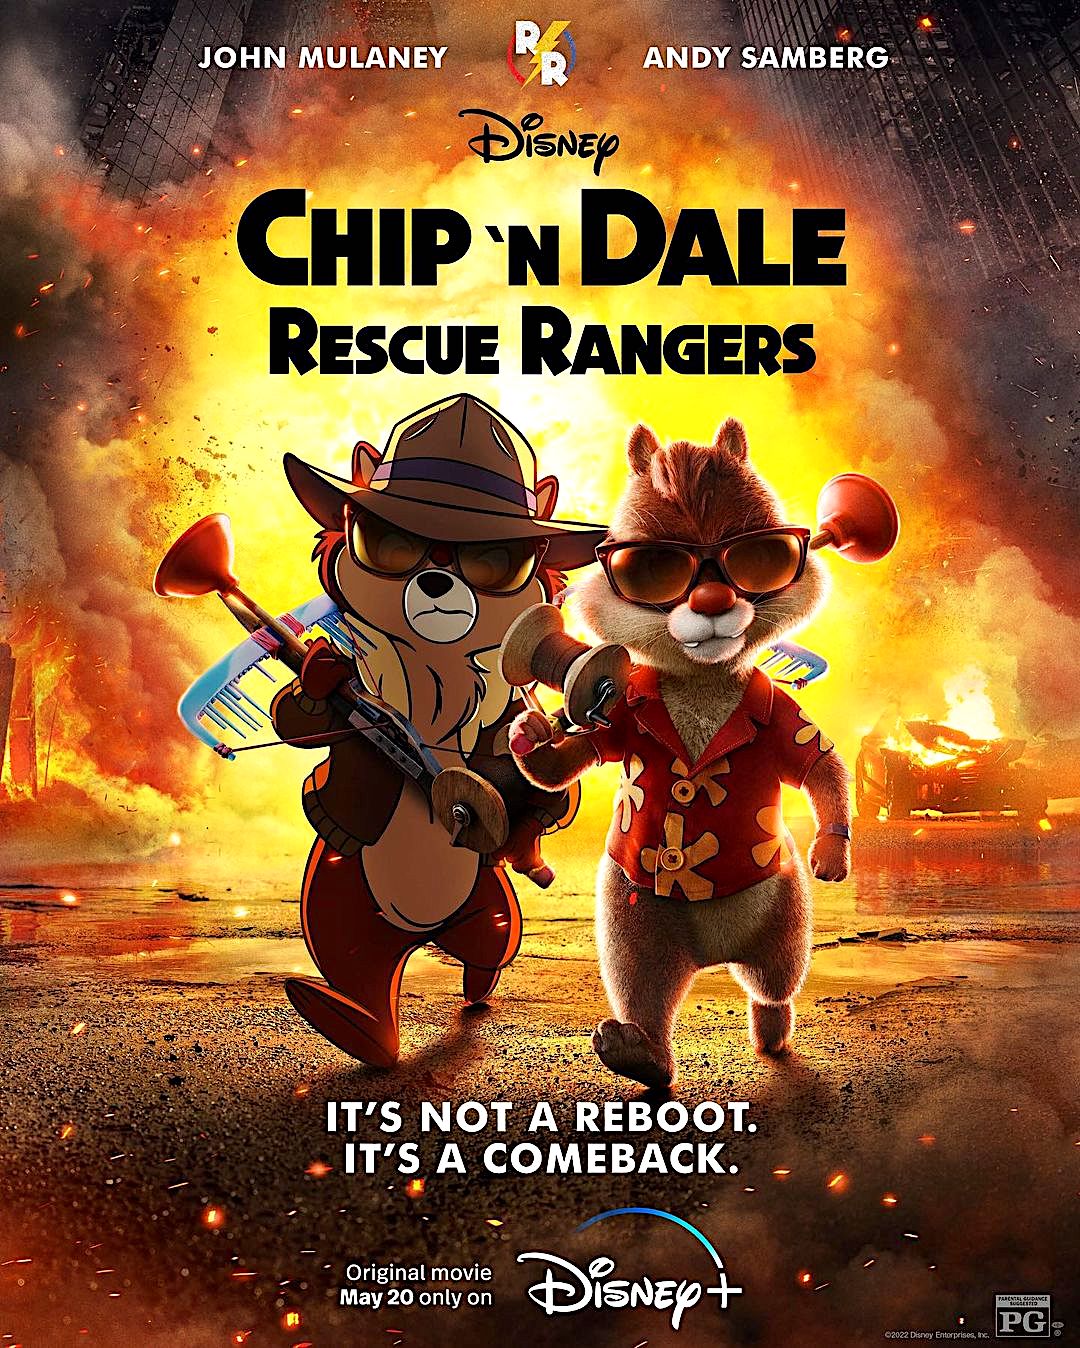 The Hit House David Matthew Andronico’s work in Disney's "Chip 'N Dale" Movie Trailer